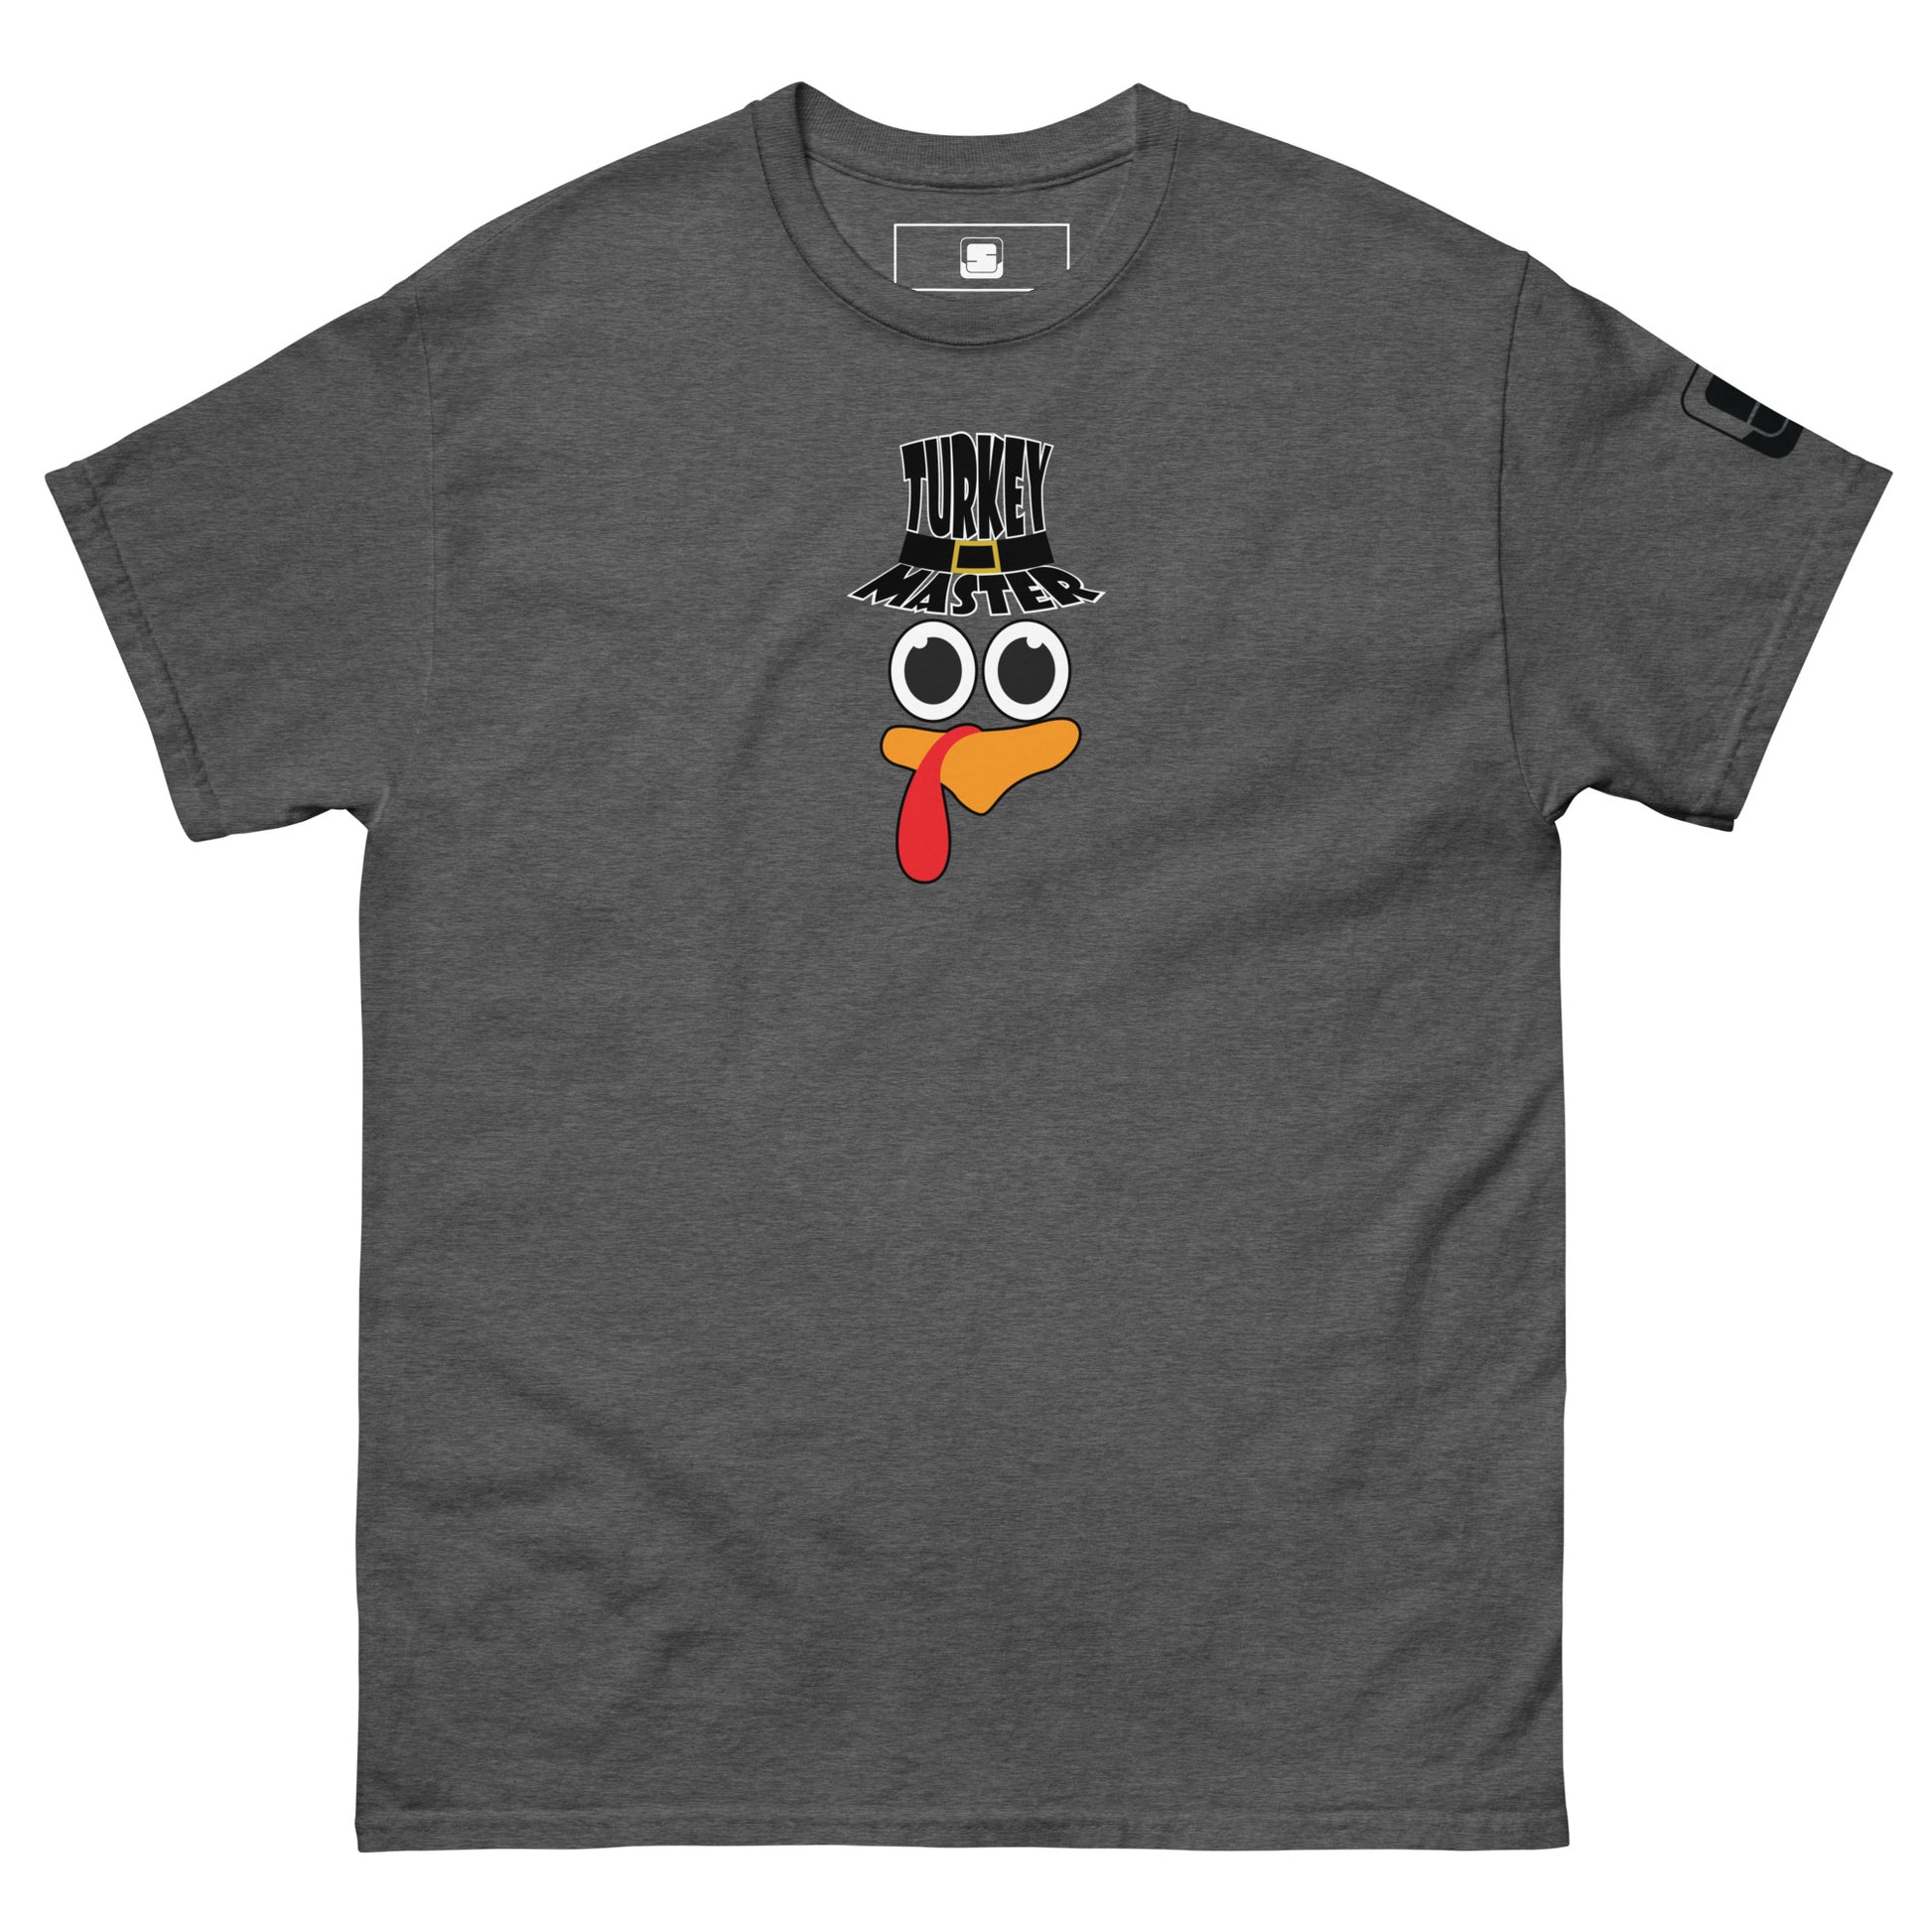 A dark heather t-shirt featuring a playful graphic design of a turkey face with eyes, an orange beak, and a red snood. Above the face, the text reads "TURKEY MASTER" in bold, stylized letters. The text is in the shape of a pilgrims hat. On the left sleeve, there's a rectangular logo patch, adding a unique touch. The shirt is laid out flat, showcasing the entire design clearly.